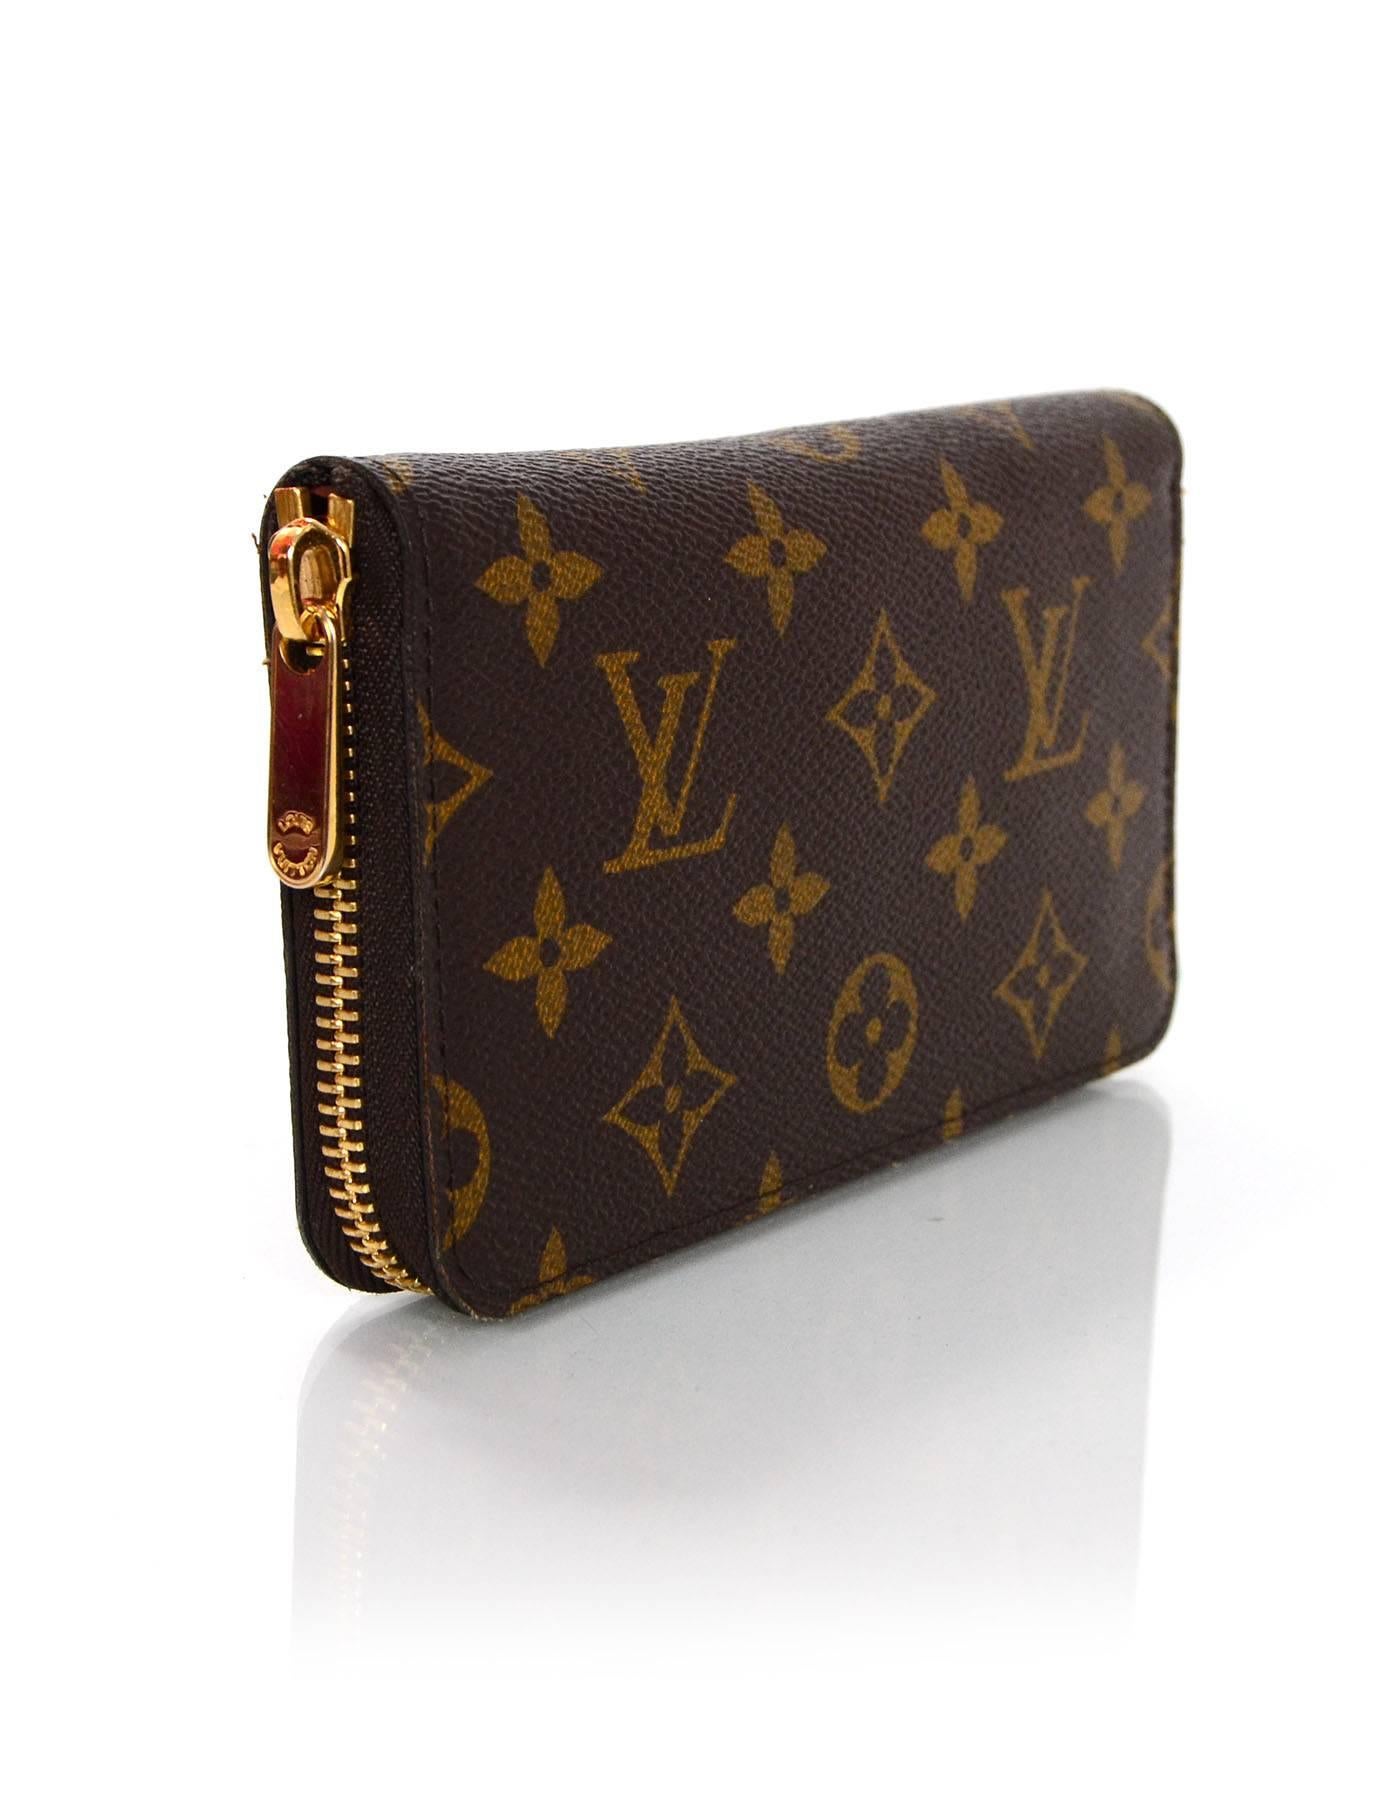 Louis Vuitton Monogram Compact Zippy Wallet

Made In: Spain
Color: Brown
Hardware: Goldtone
Materials: Coated canvas and metal
Year of Production: 2016
Serial Number/Date Code: CI0176
Lining: Brown coated canvas
Closure/Opening: Zip around